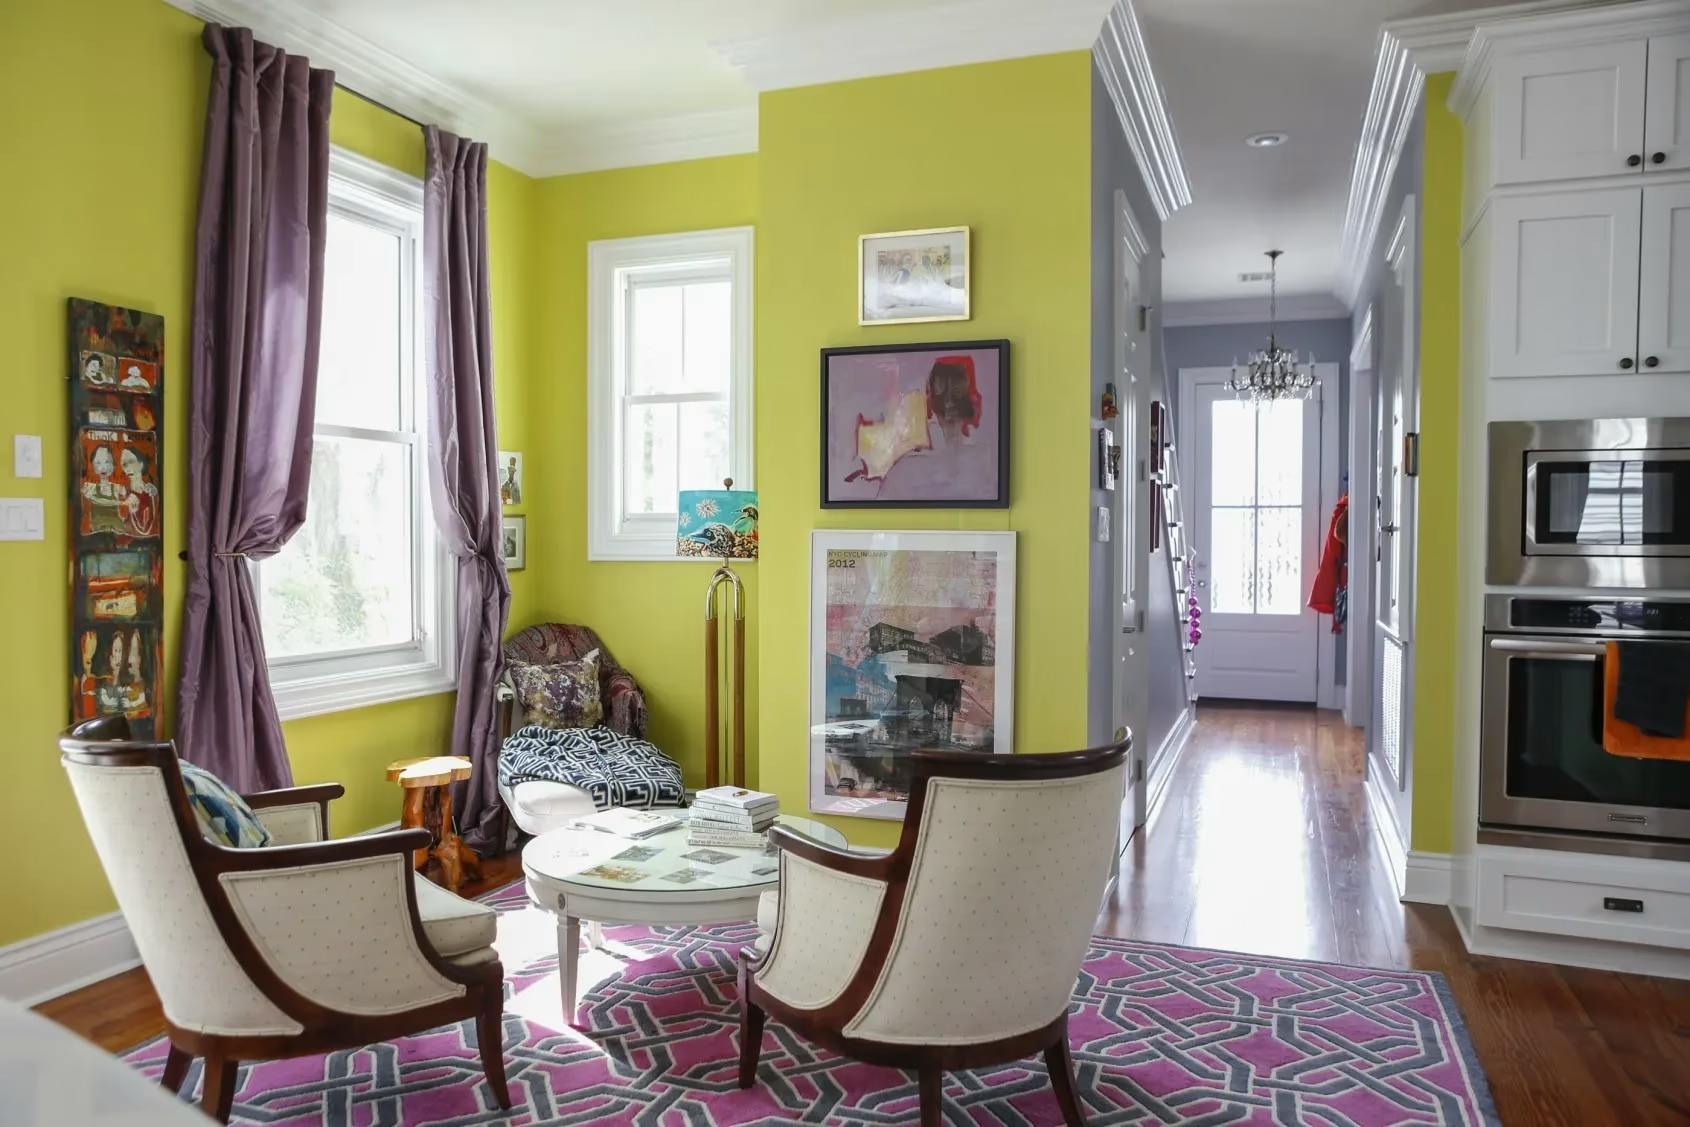 Nervy Hue SW 6917 by Sherwin-Williams, featured in Apartment Therapy, photo by Jacqueline Marque